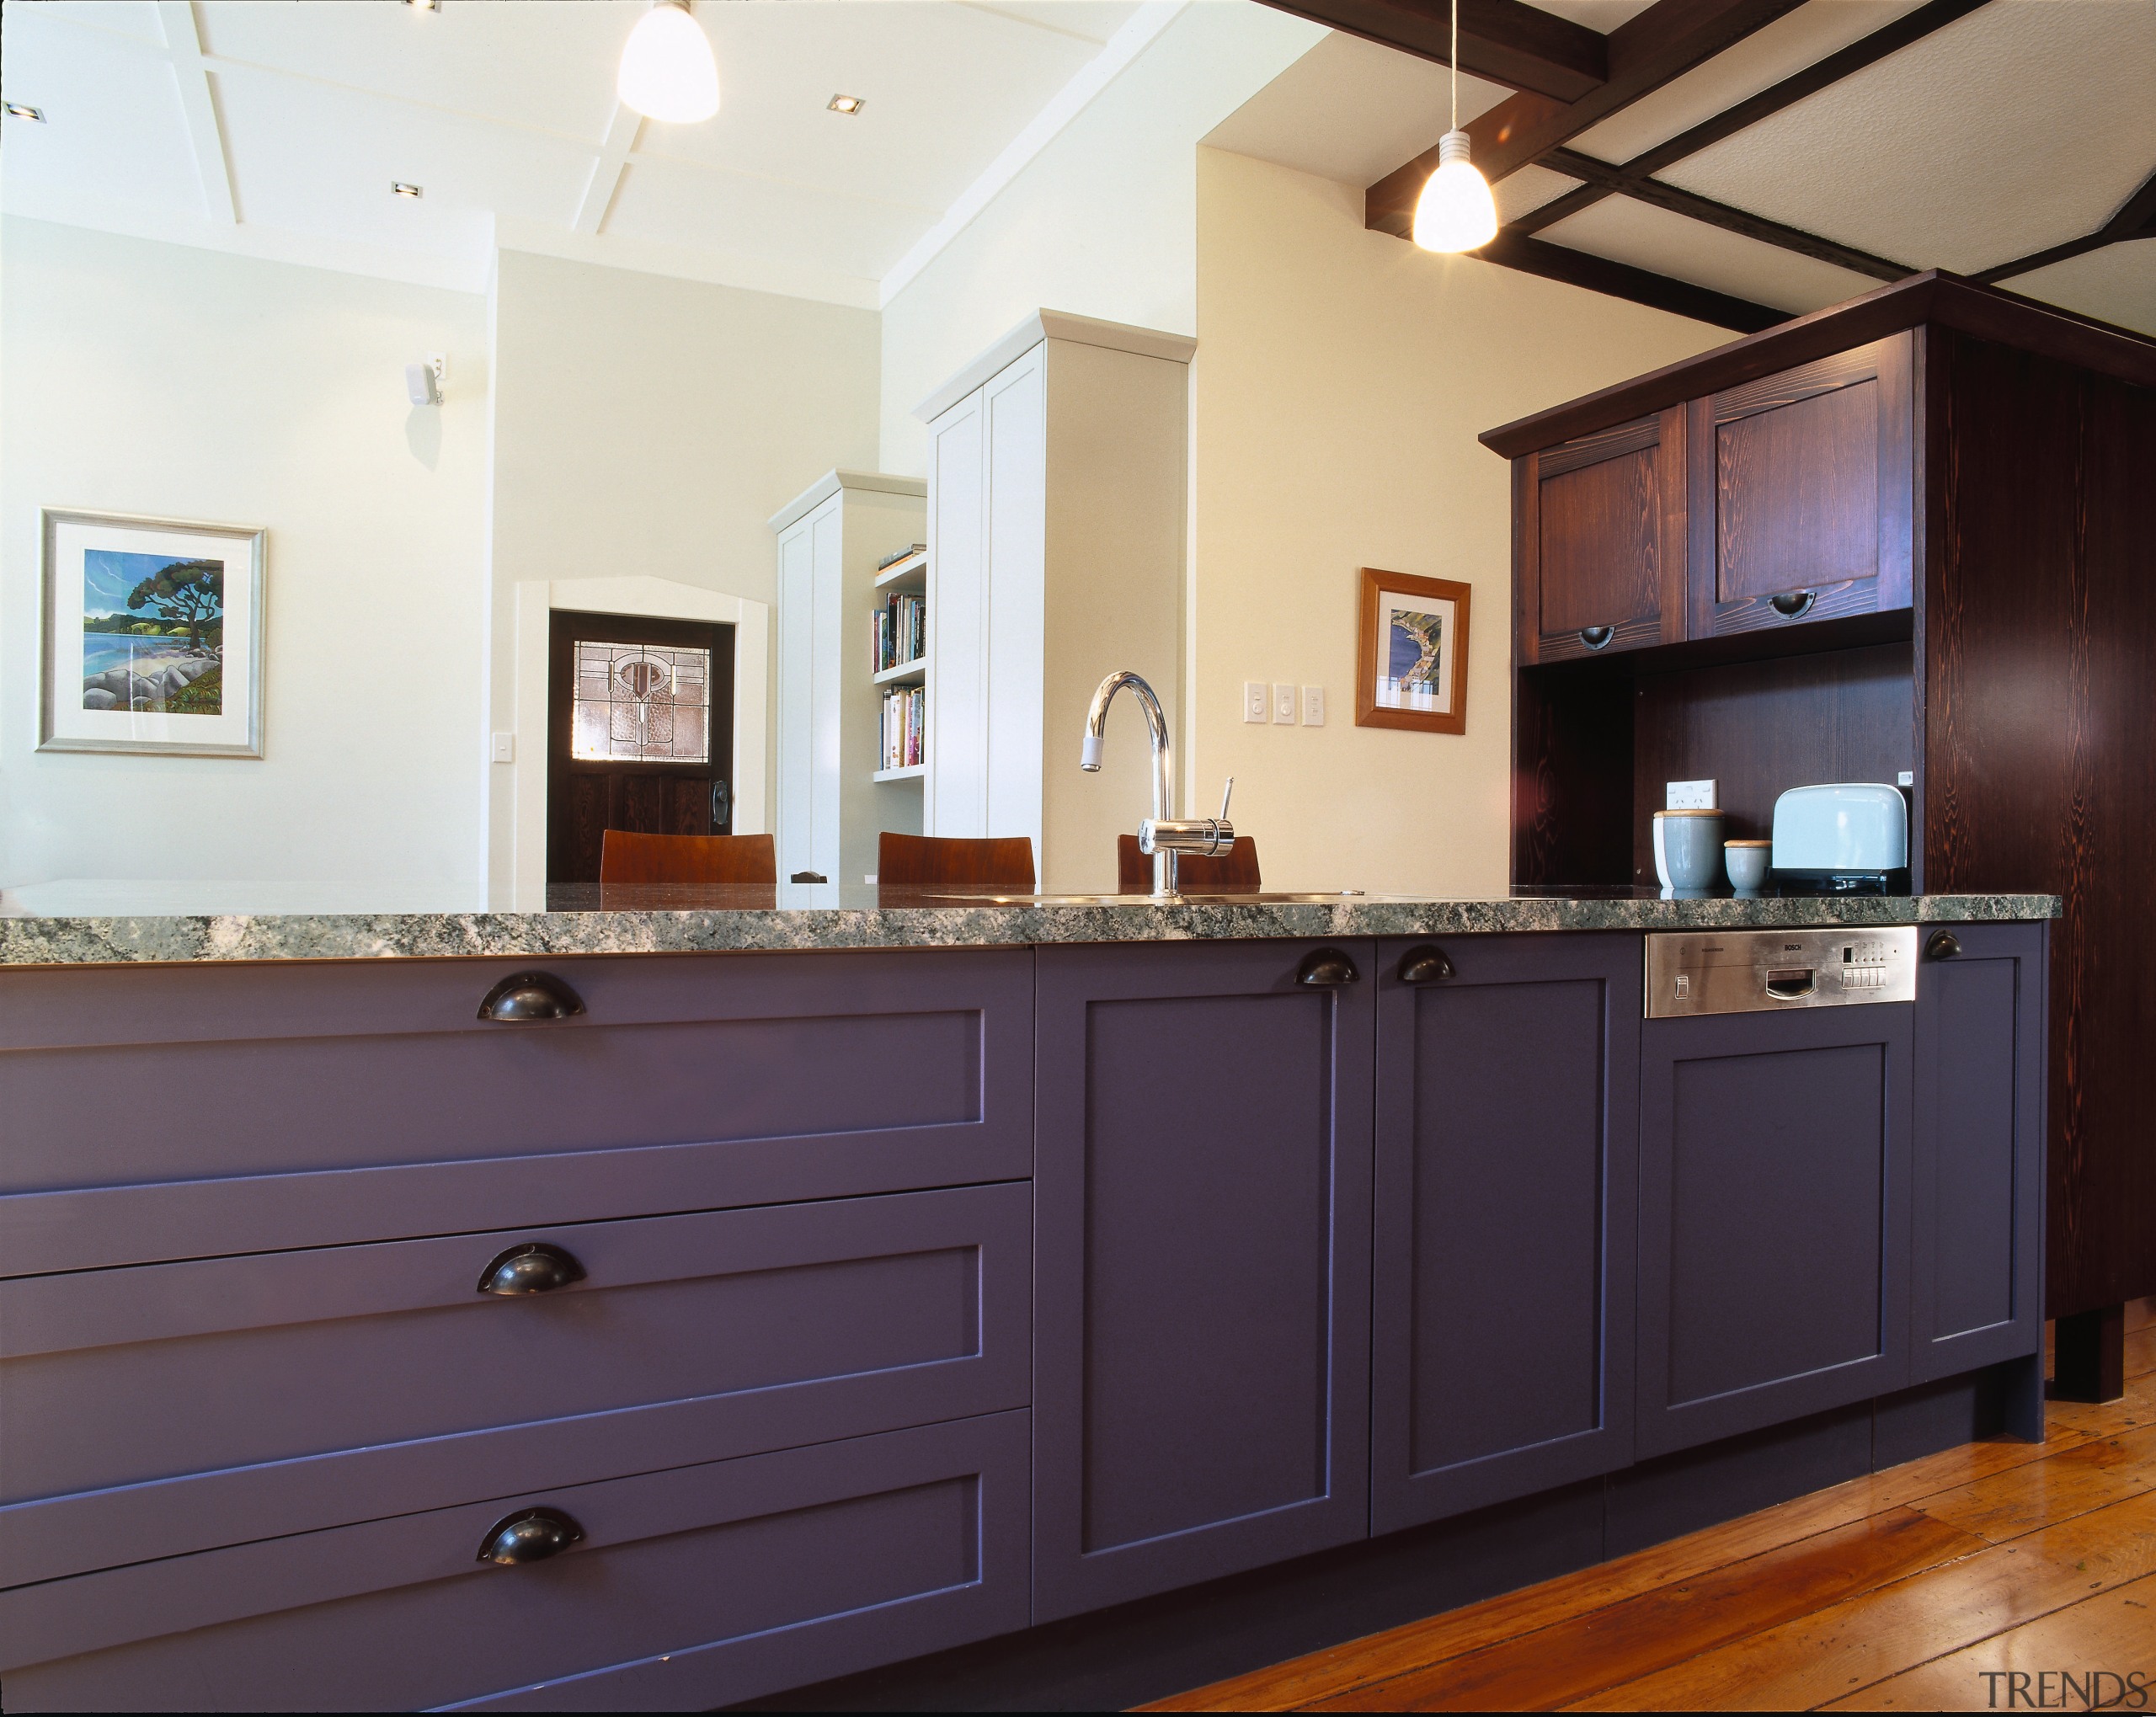 view of kitchen cabinetry which hint an historic cabinetry, countertop, furniture, home, interior design, kitchen, property, real estate, room, black, white